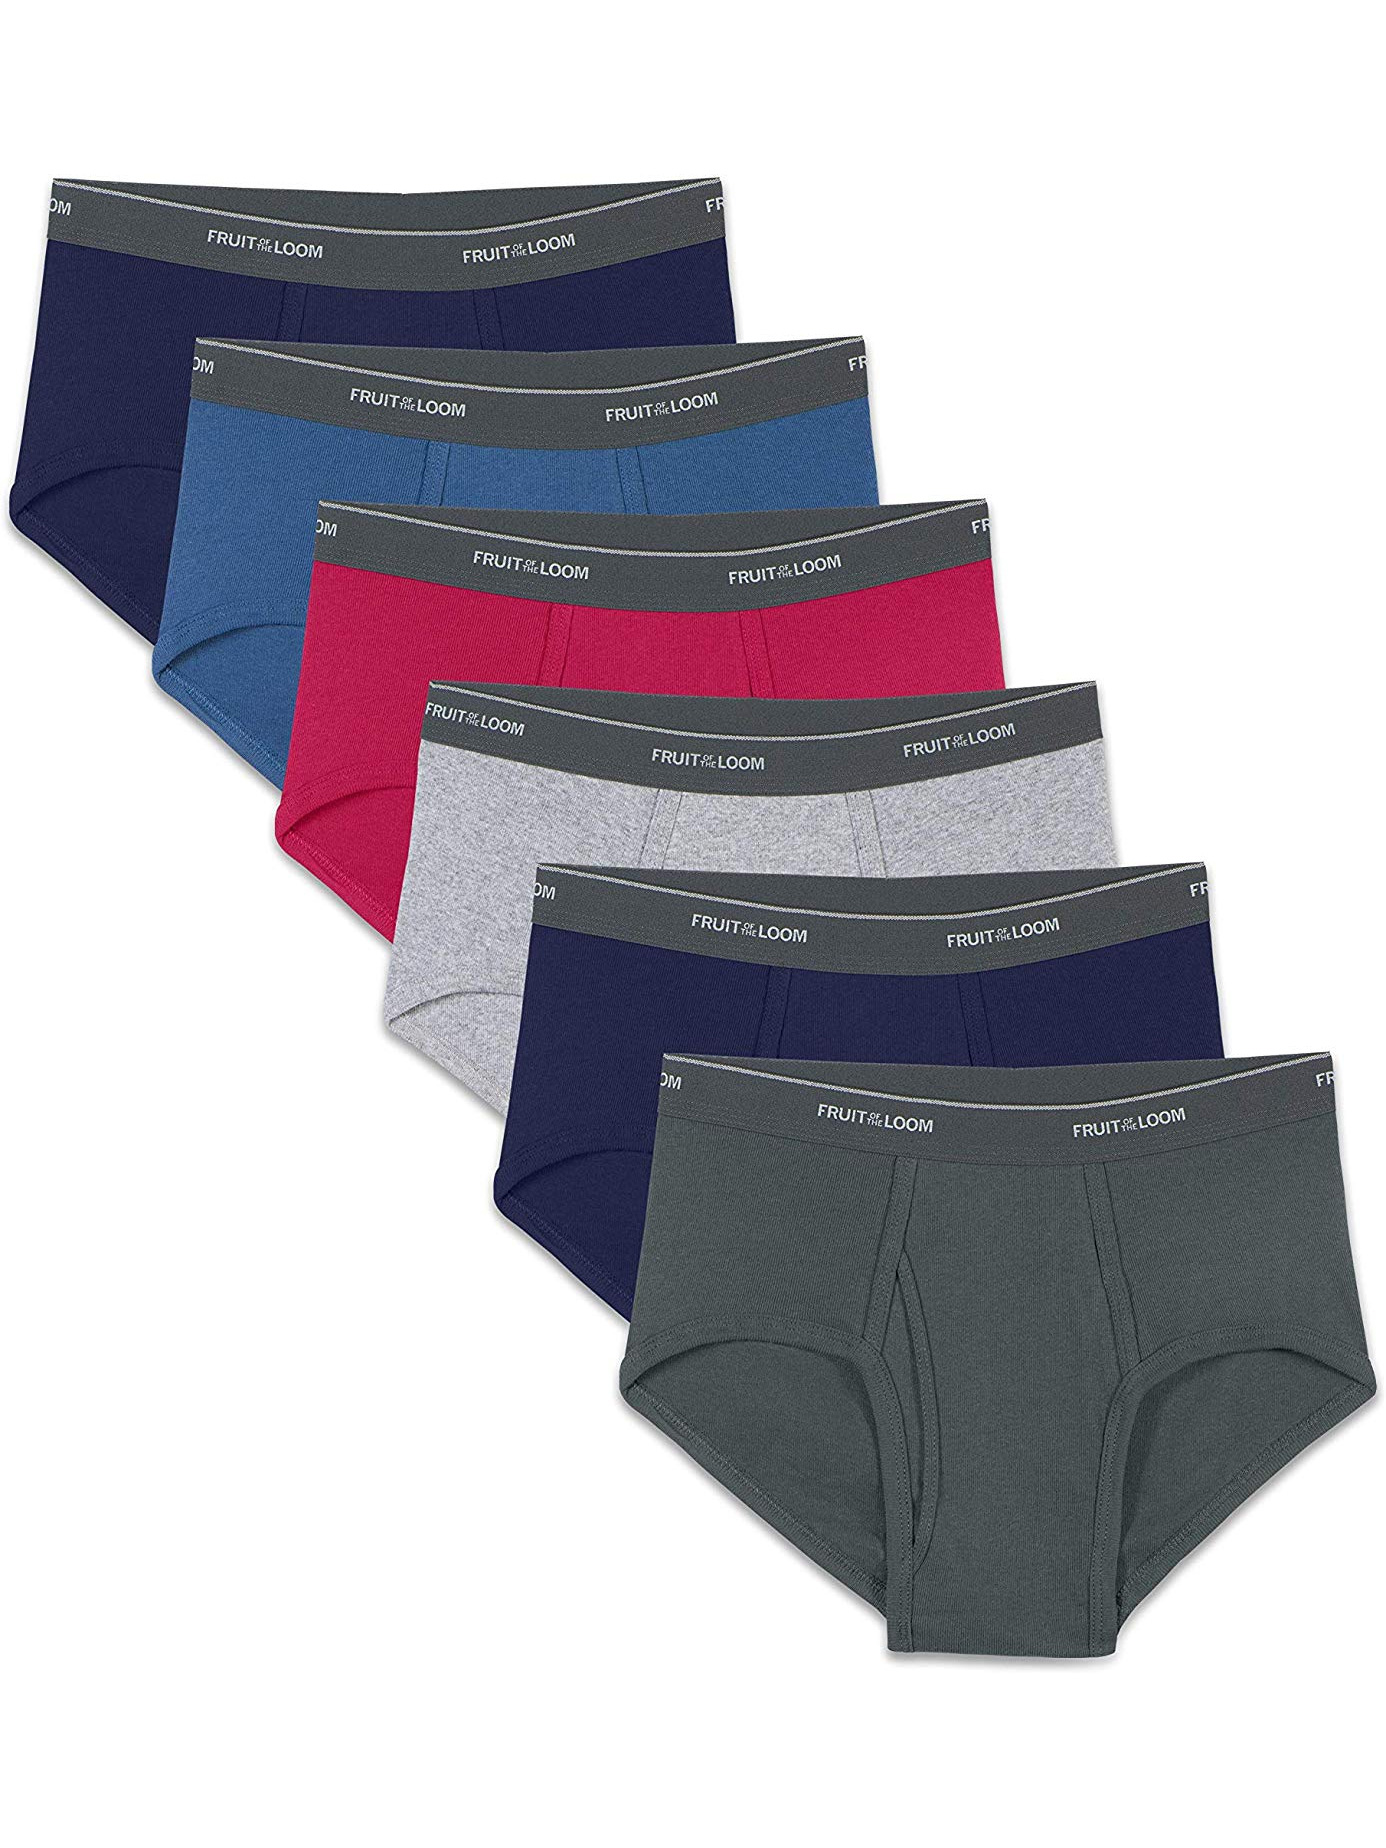 Fruit Of The Loom Mens Assorted Color Fashion Briefs 6 Pack 6p4610